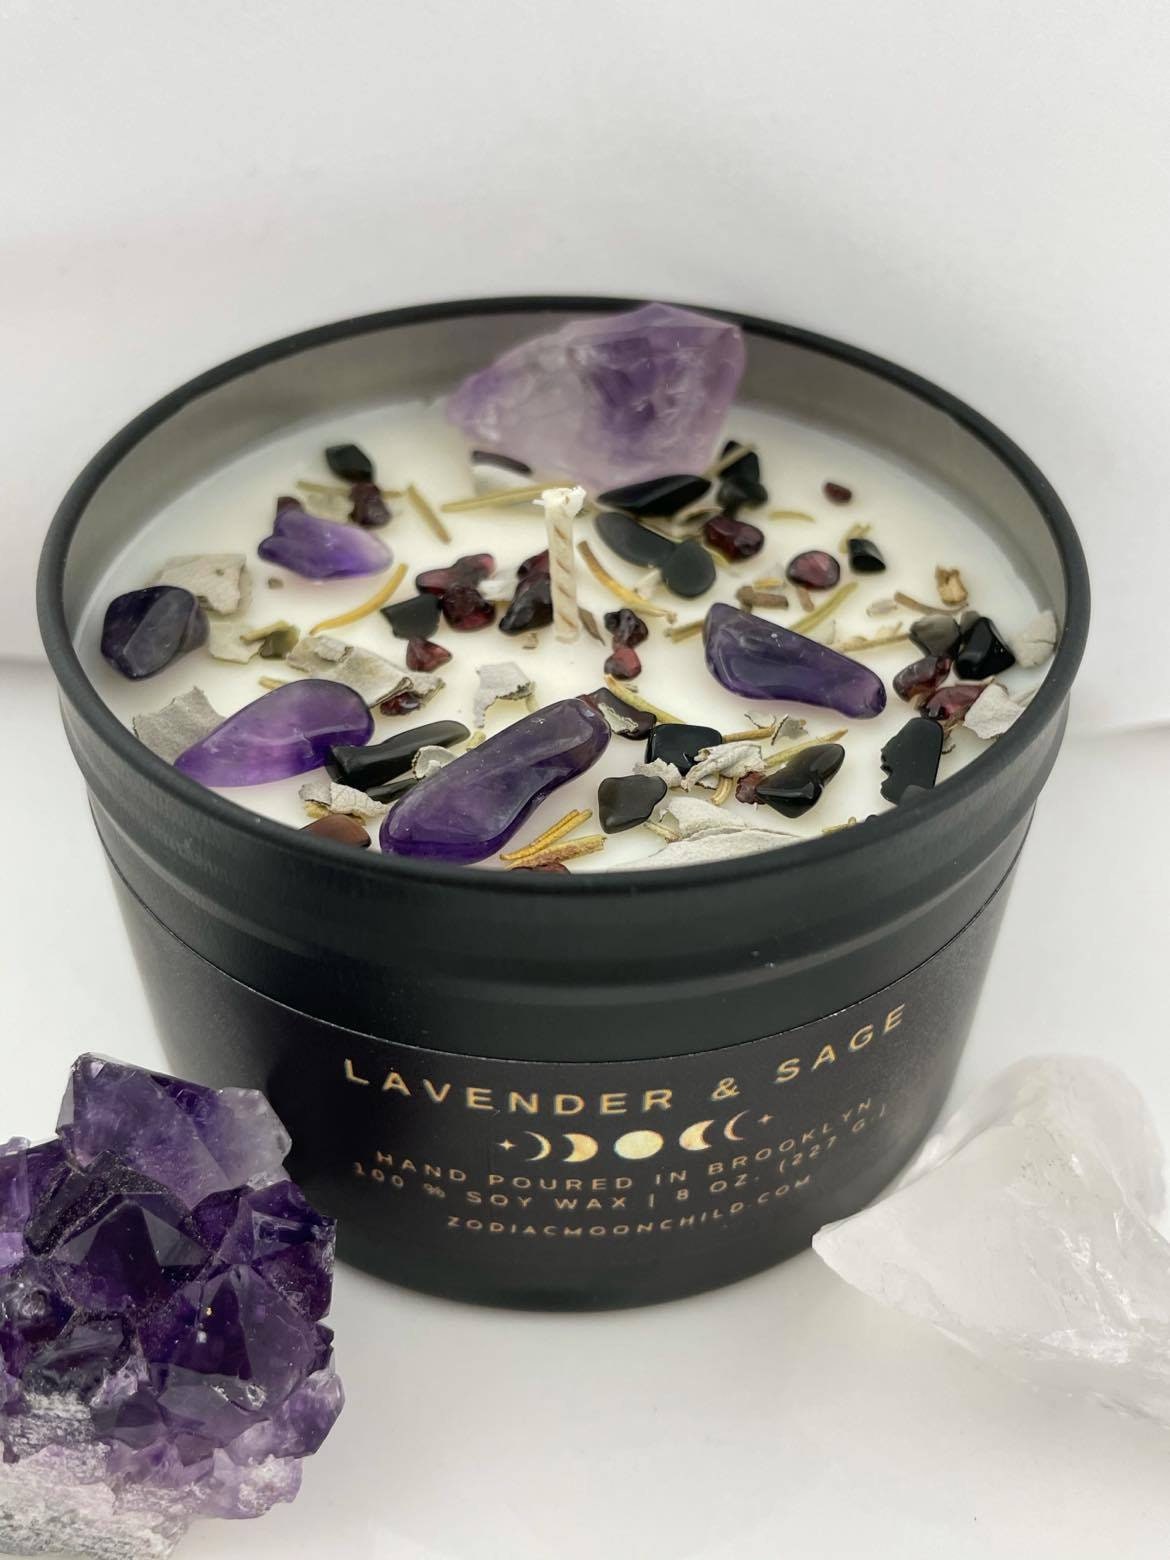 Crystal Herb Candle \u2013 100% Natural Soy Wax Lavender & White Sage Witch\u2019s Brew Blend Crystal Candle Spiritual Crystal Candle Collection